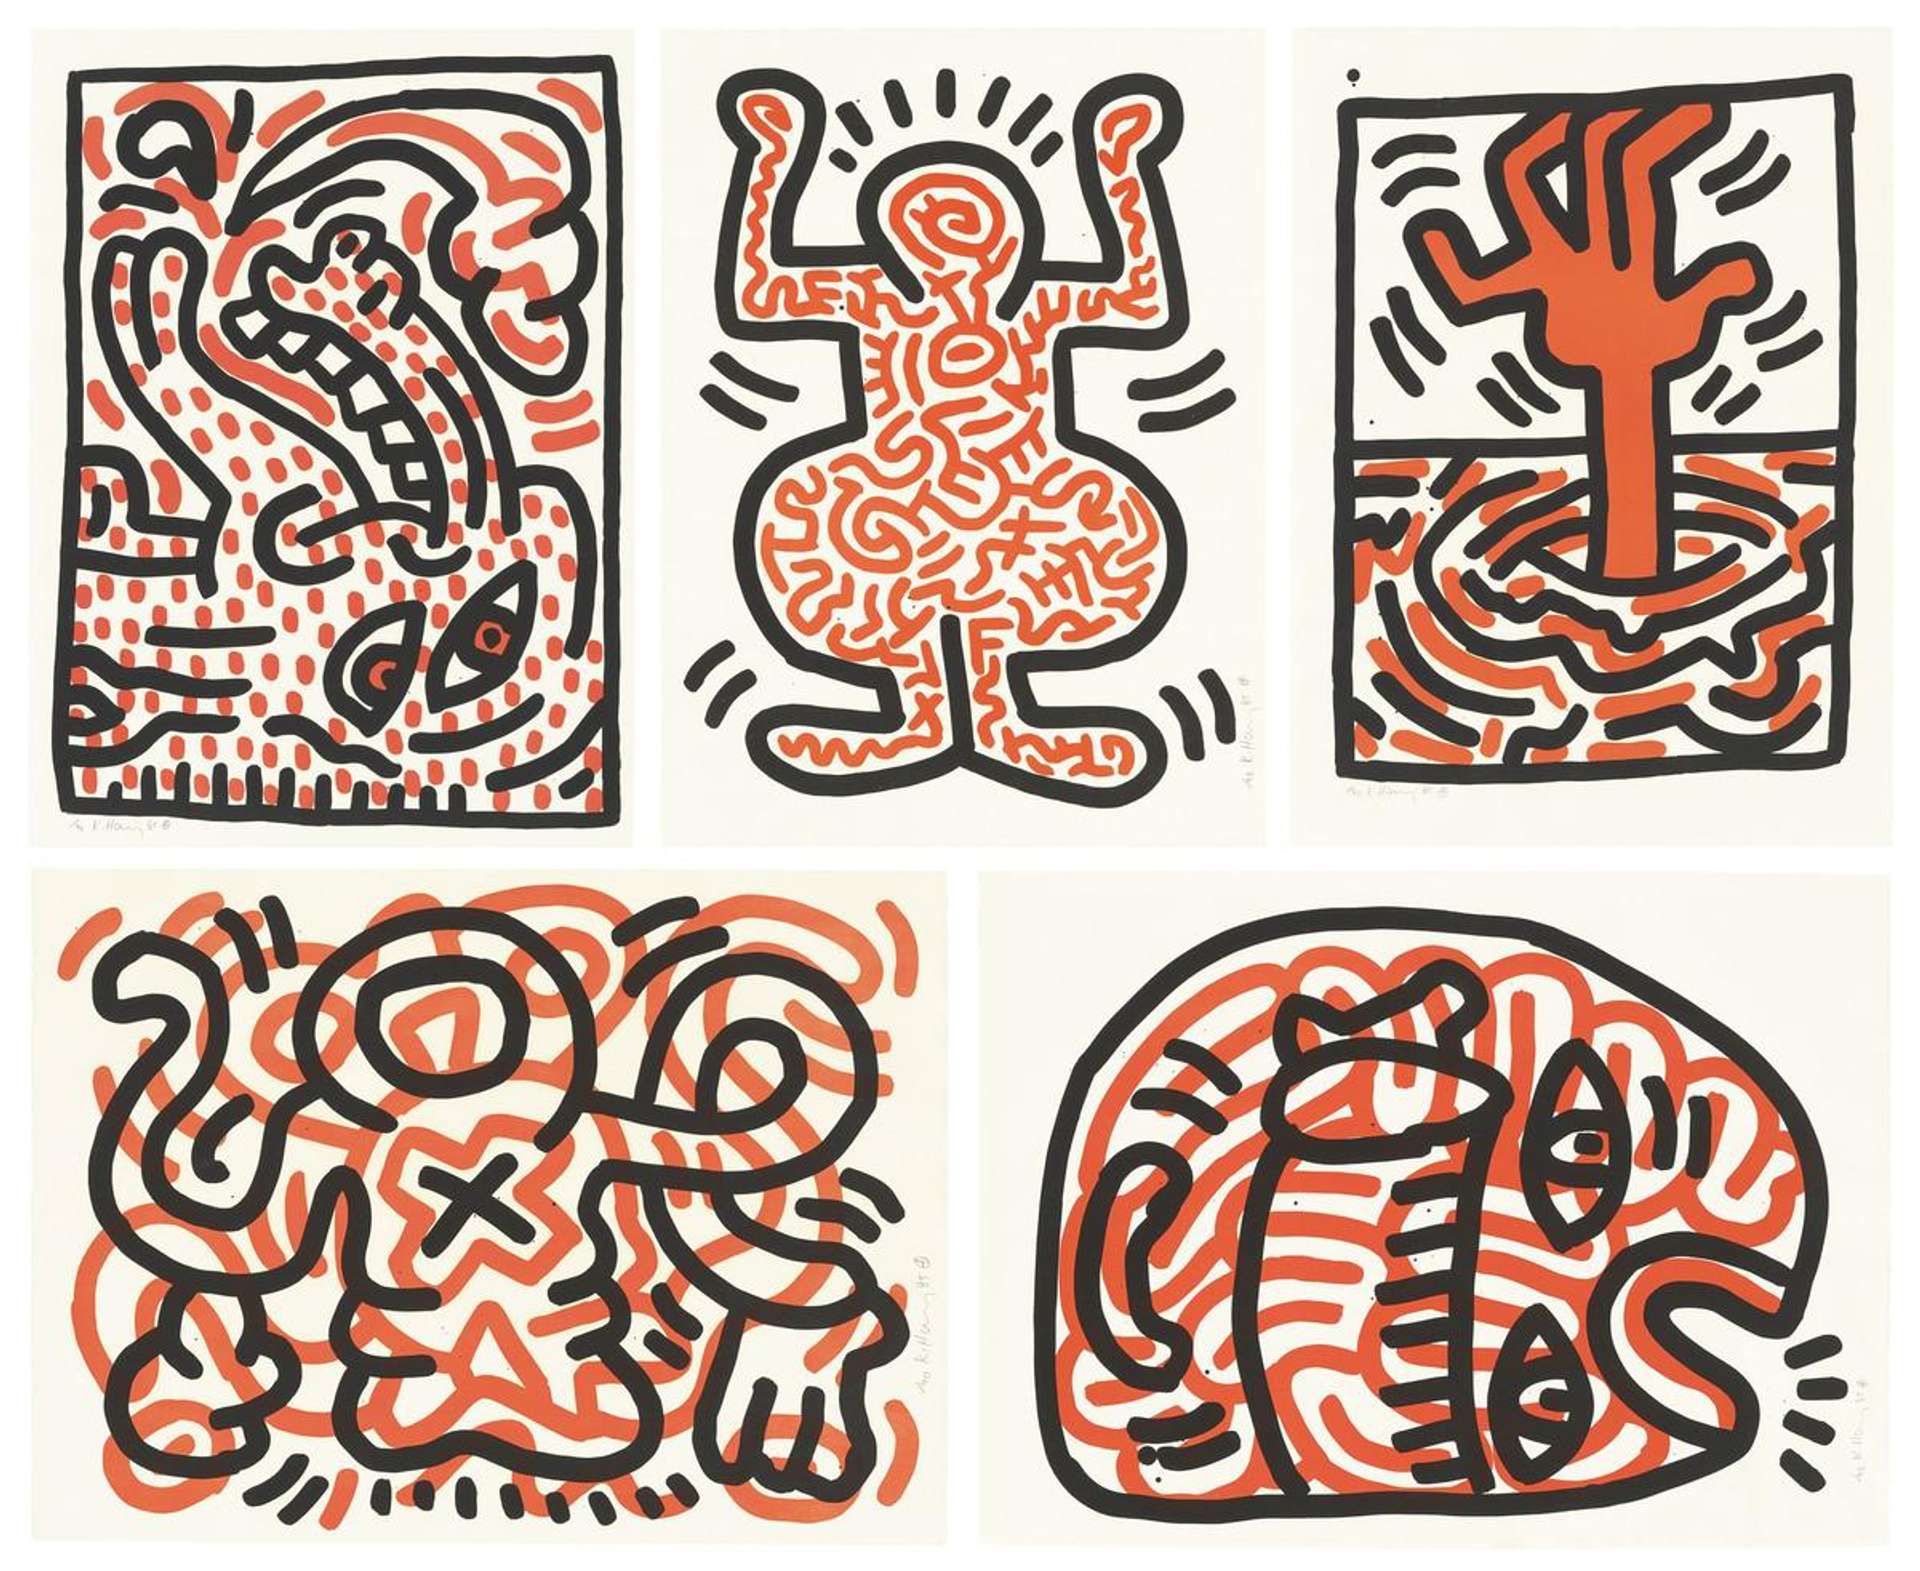 Ludo (complete set) - Signed Print by Keith Haring 1985 - MyArtBroker